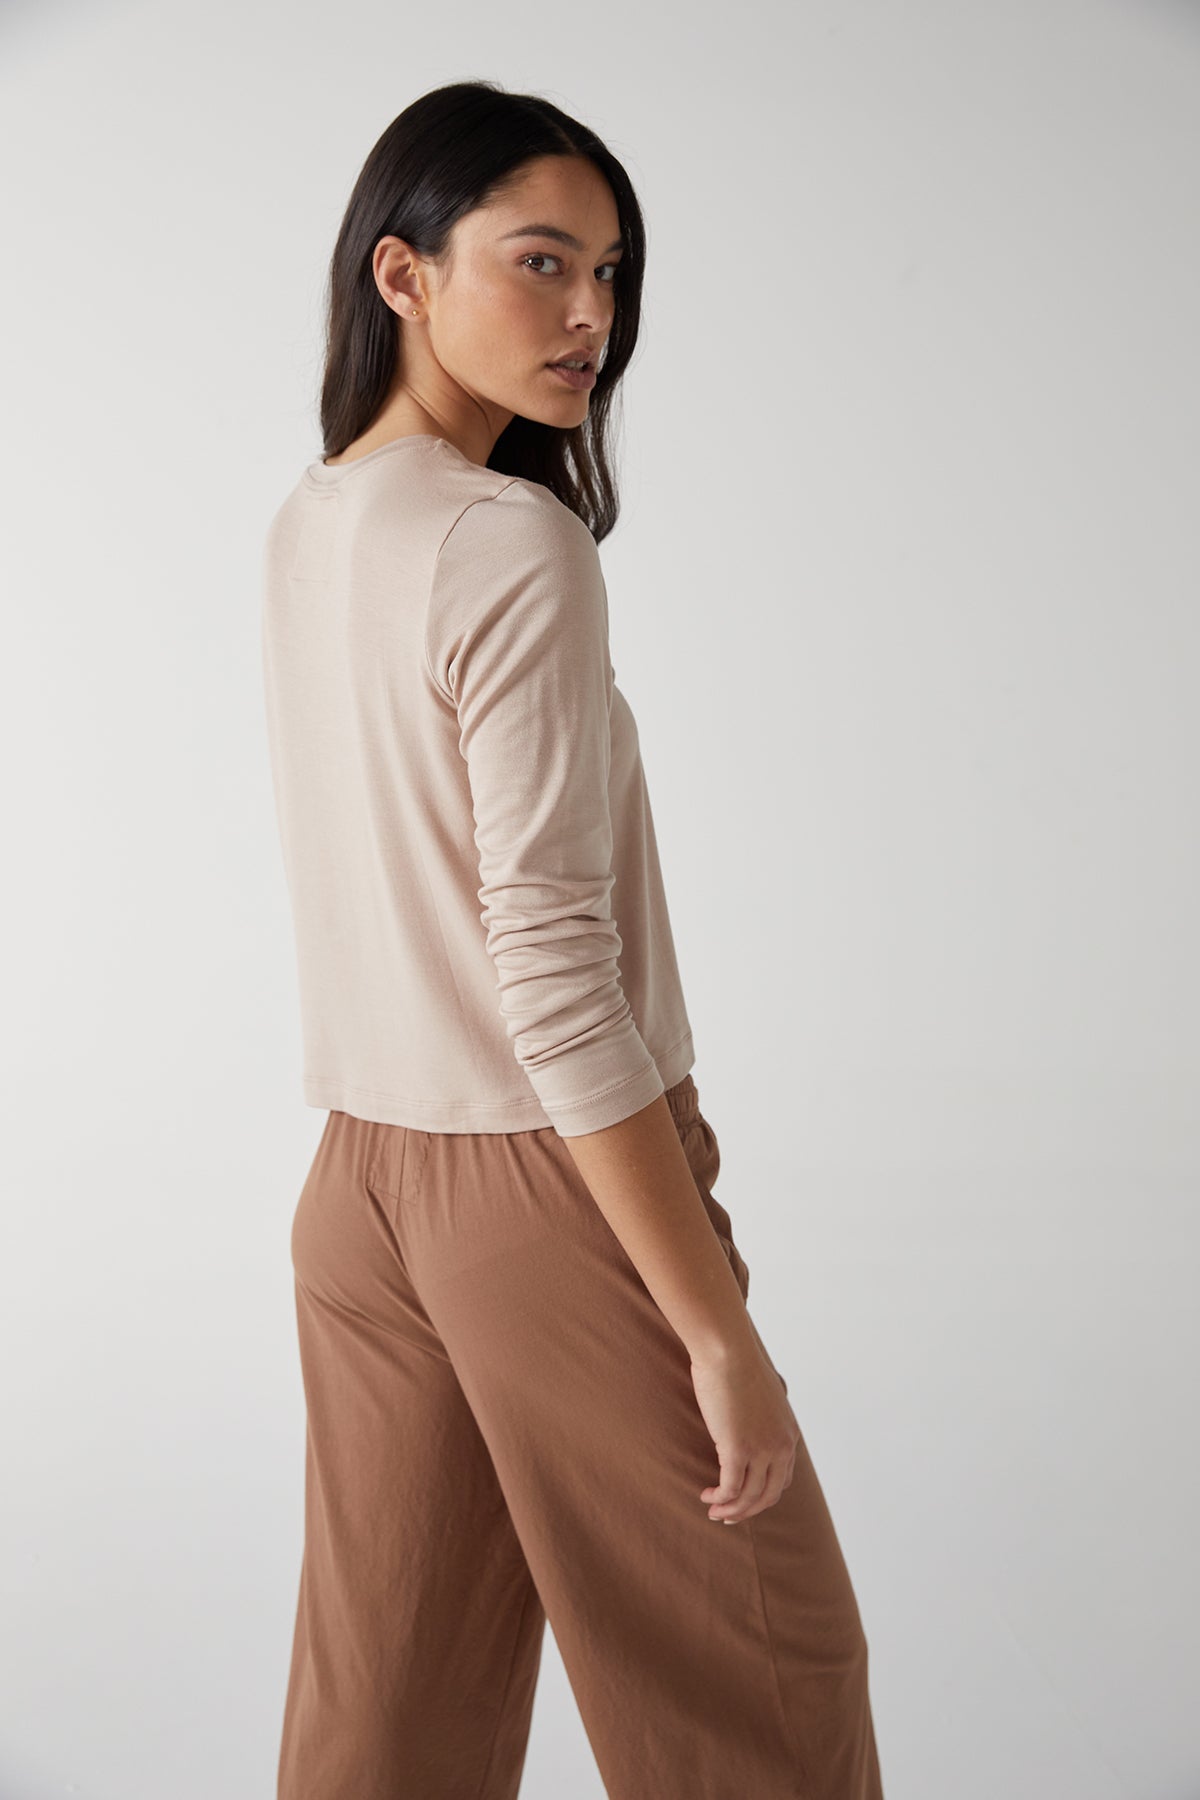 The model is wearing Velvet by Jenny Graham tan wide leg pants and a beige sweater.-25483543445697